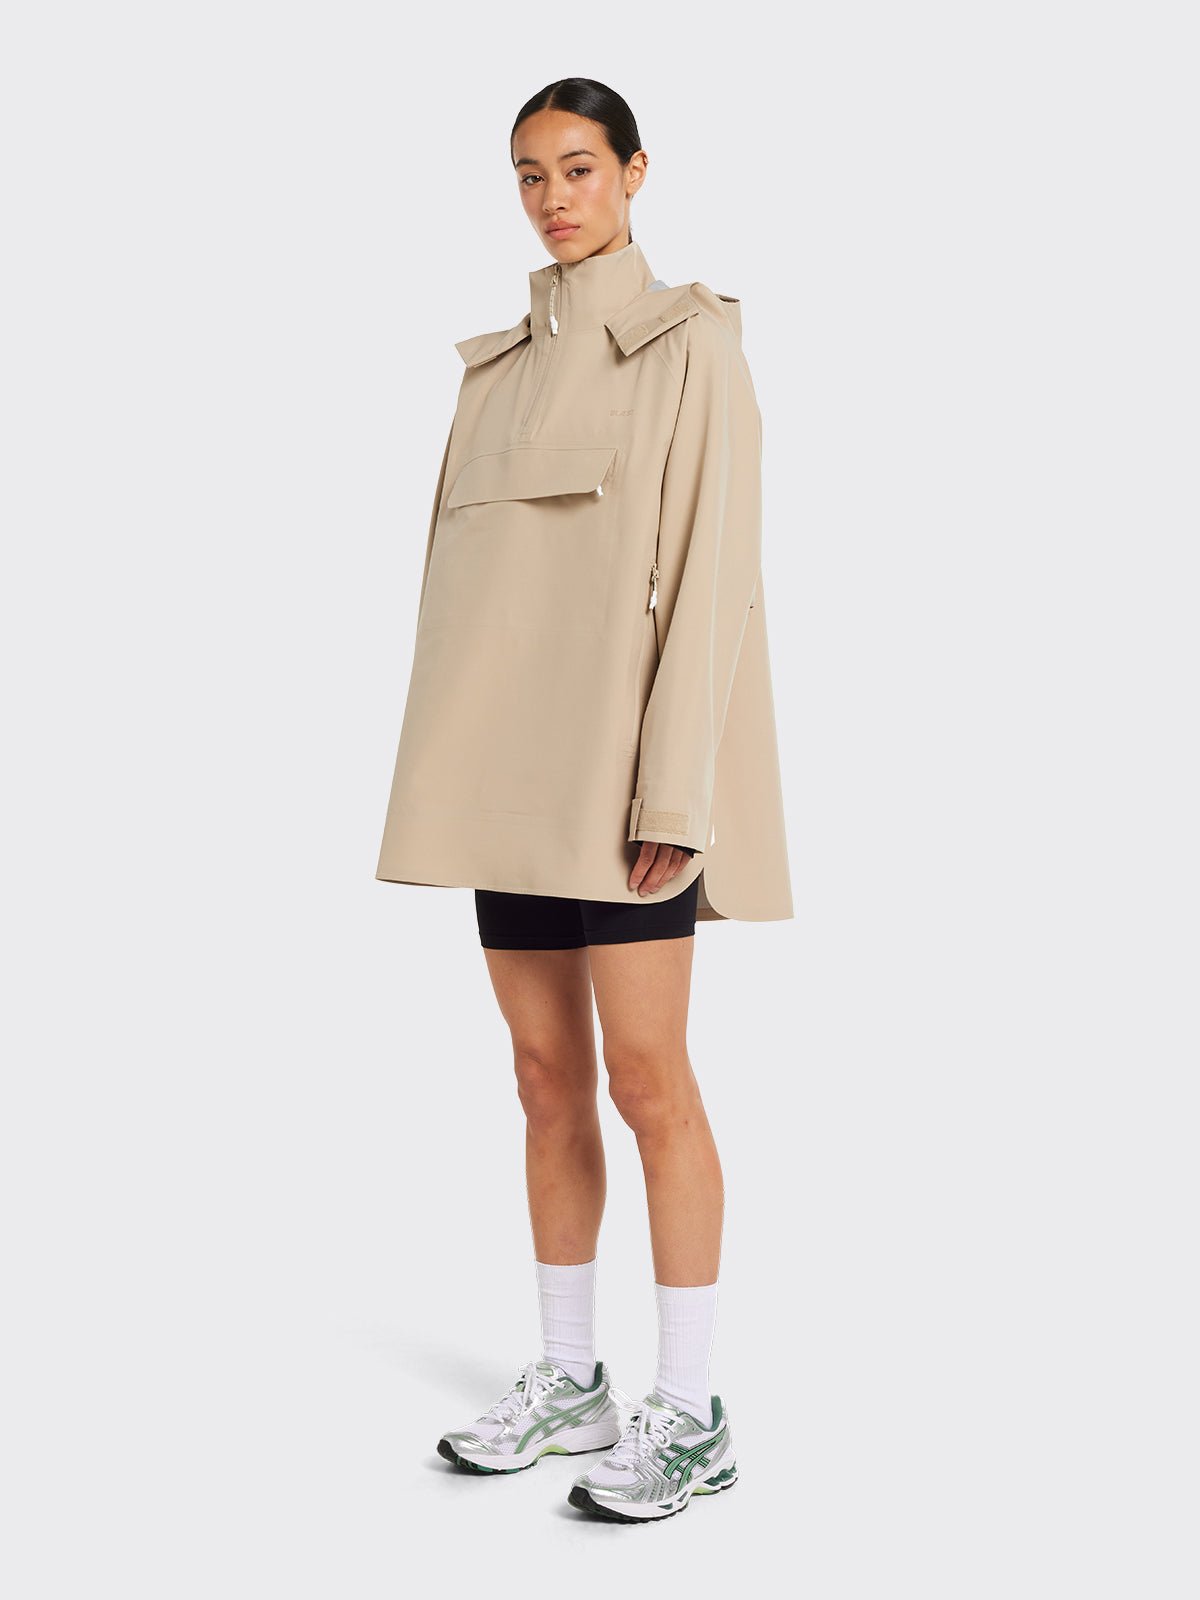 Woman wearing Voss poncho by Blæst in Beige